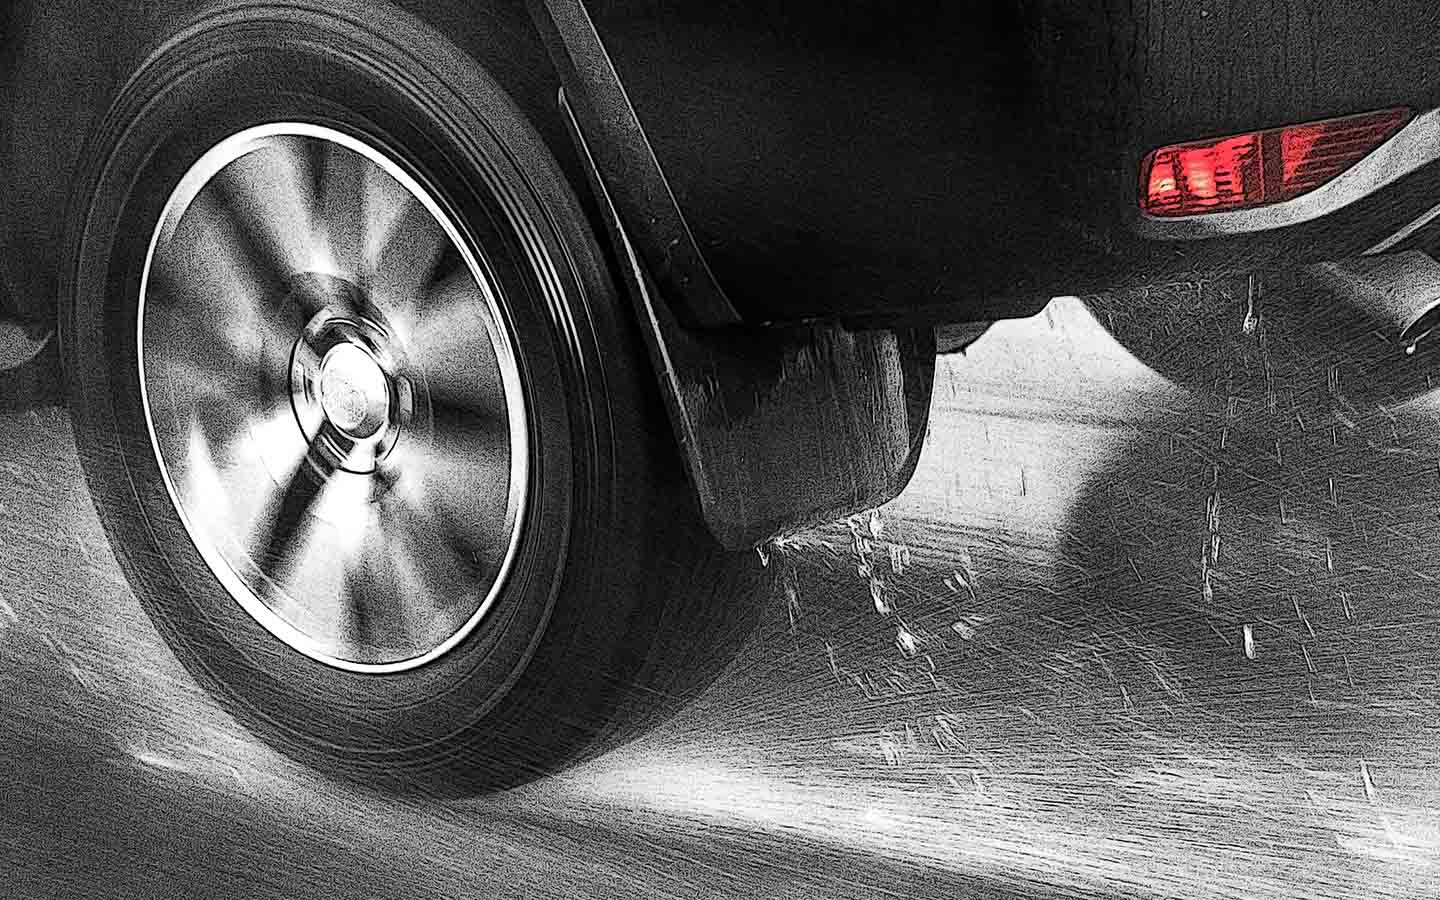 better control and stability on slippery surfaces is one of the advantages of four-wheel drive